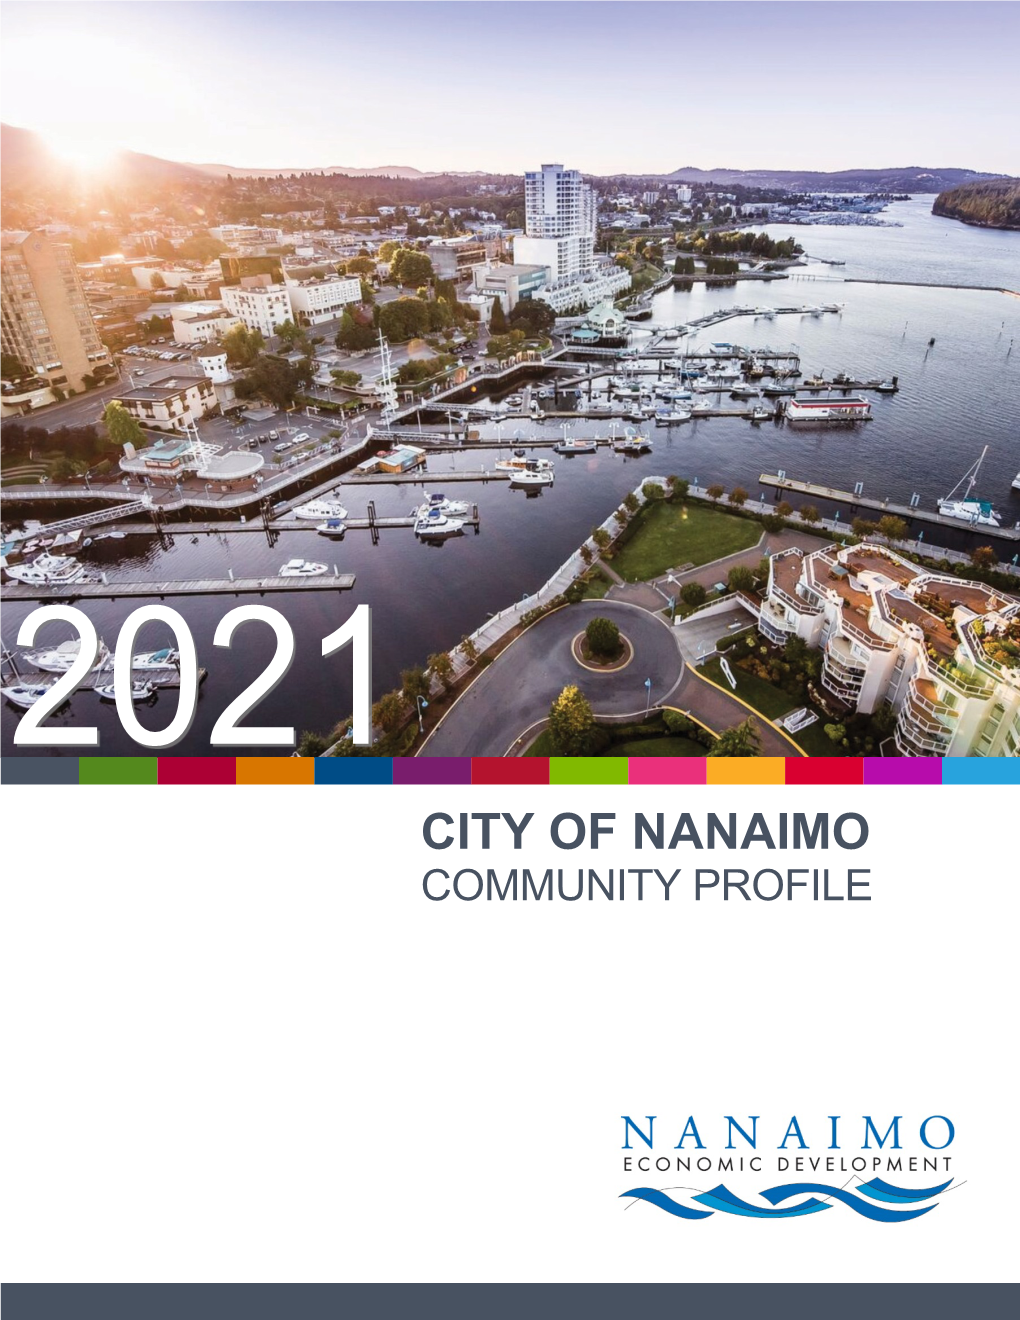 Population by Age Breakdown City of Nanaimo